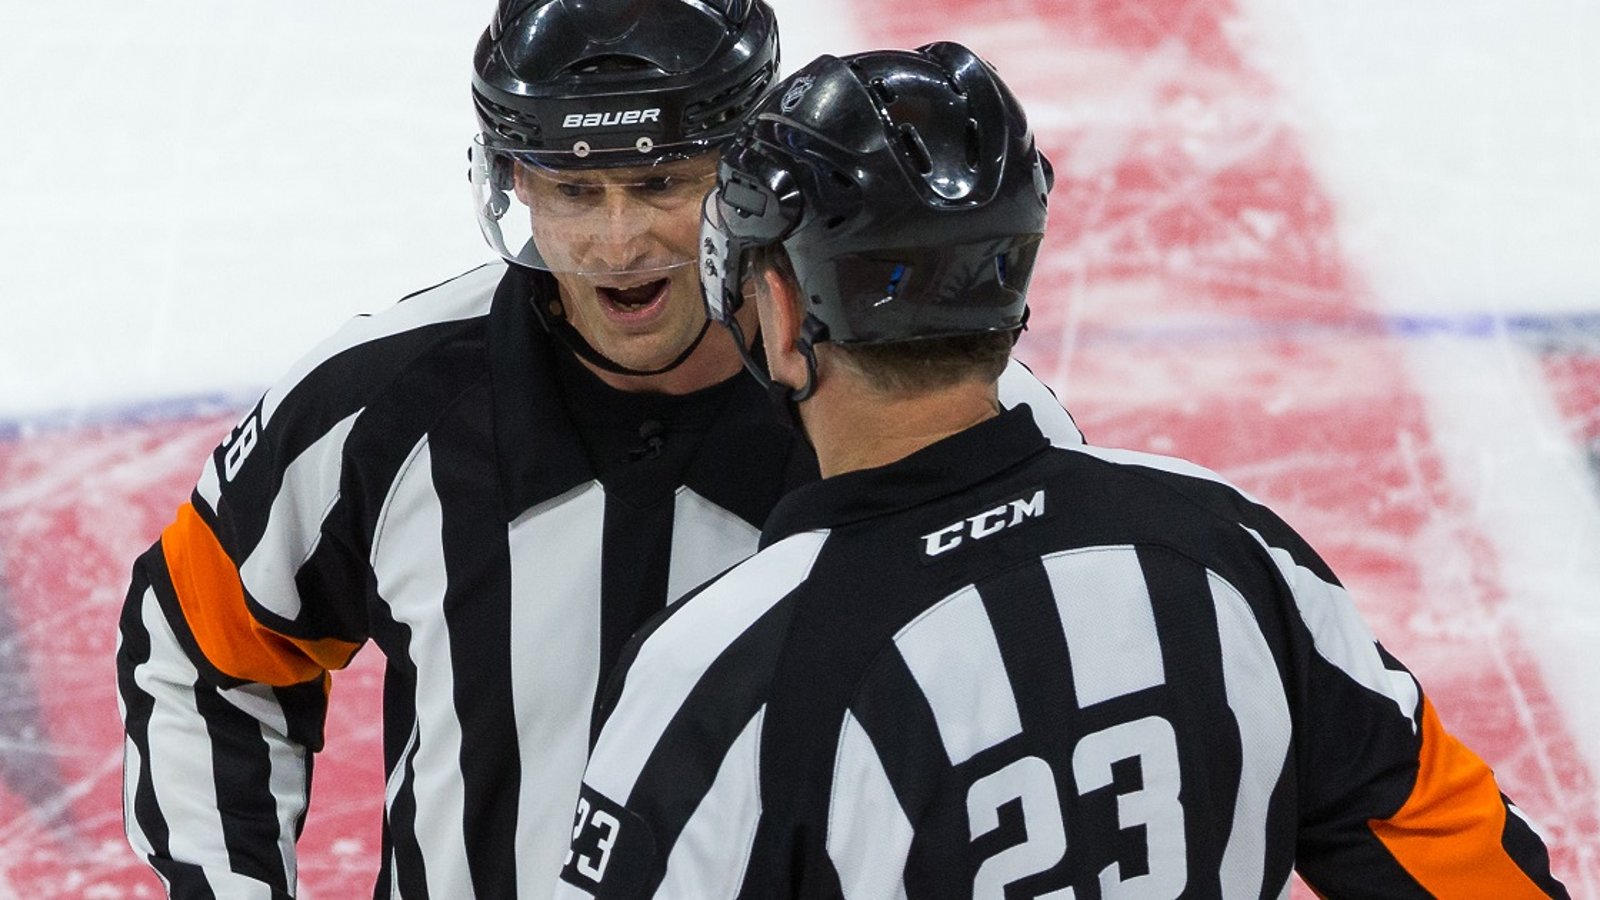 Insider accuses the NHL and its referees of “blatant discrimination,” against one player and his team.